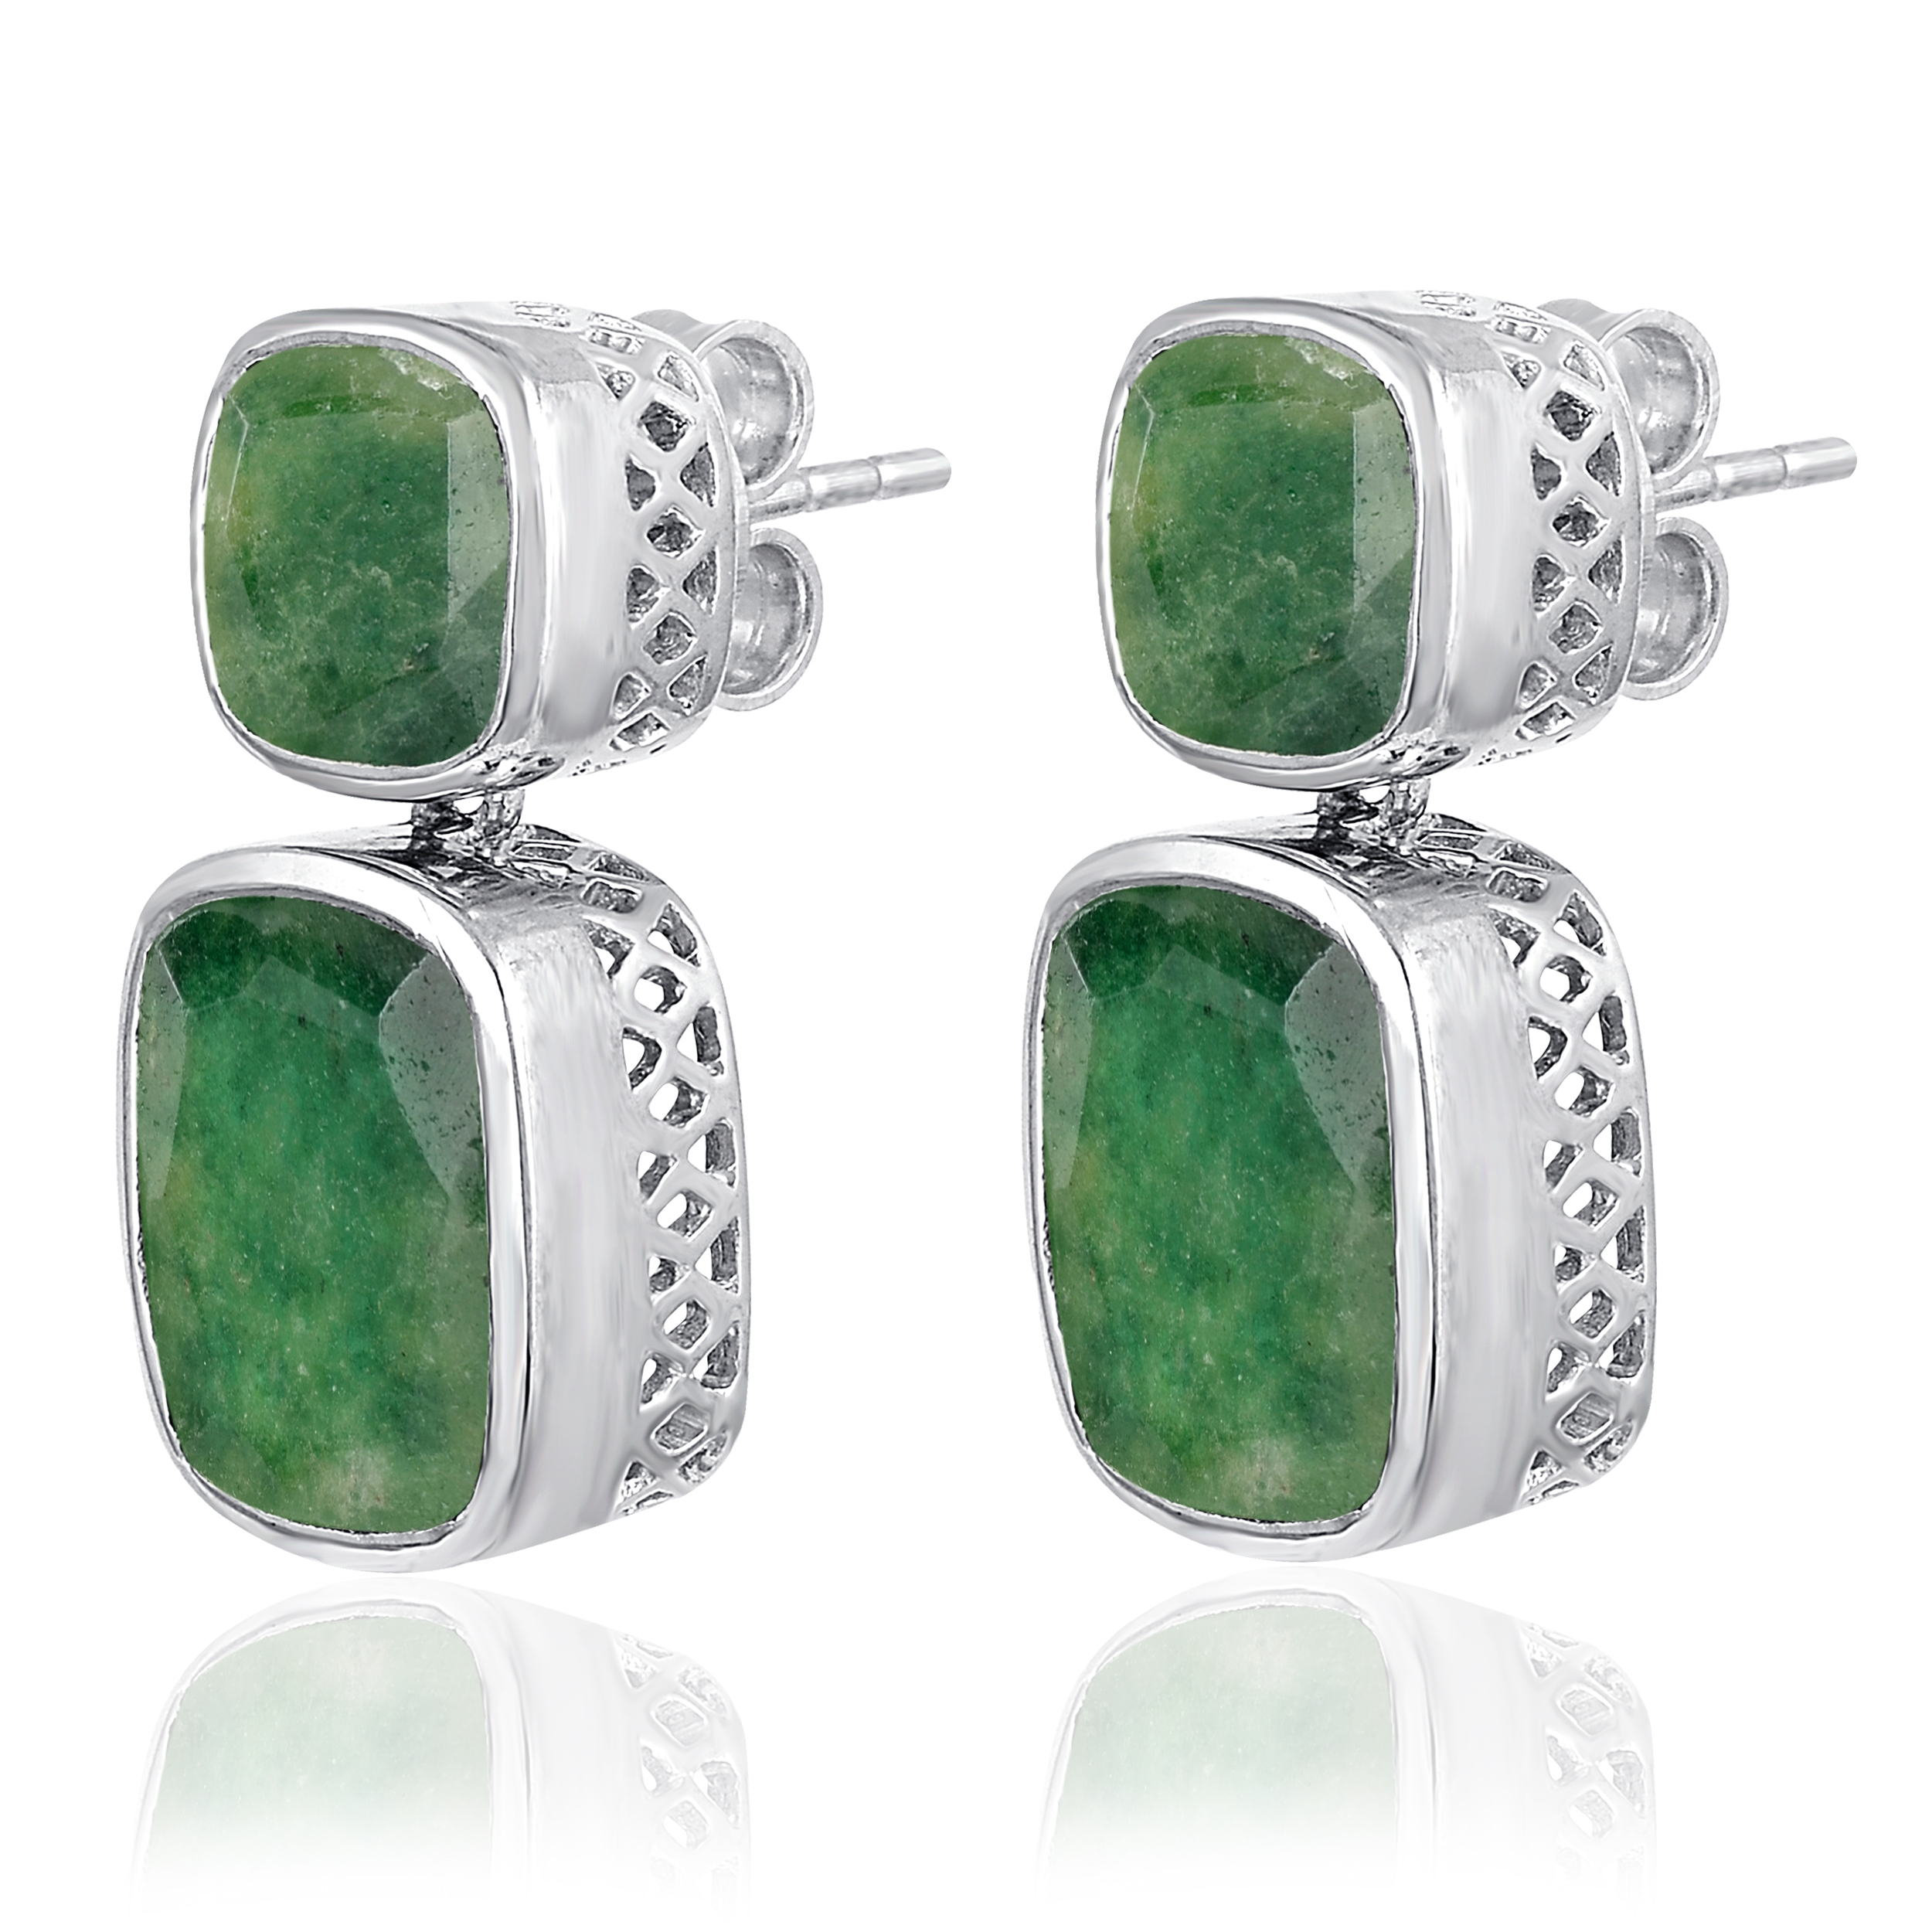 Dangling 14.52 Ctw Dyed Emerald 925 Sterling Silver Cushion Dangle Earrings For Women By Orchid Jewelry - image 4 of 7